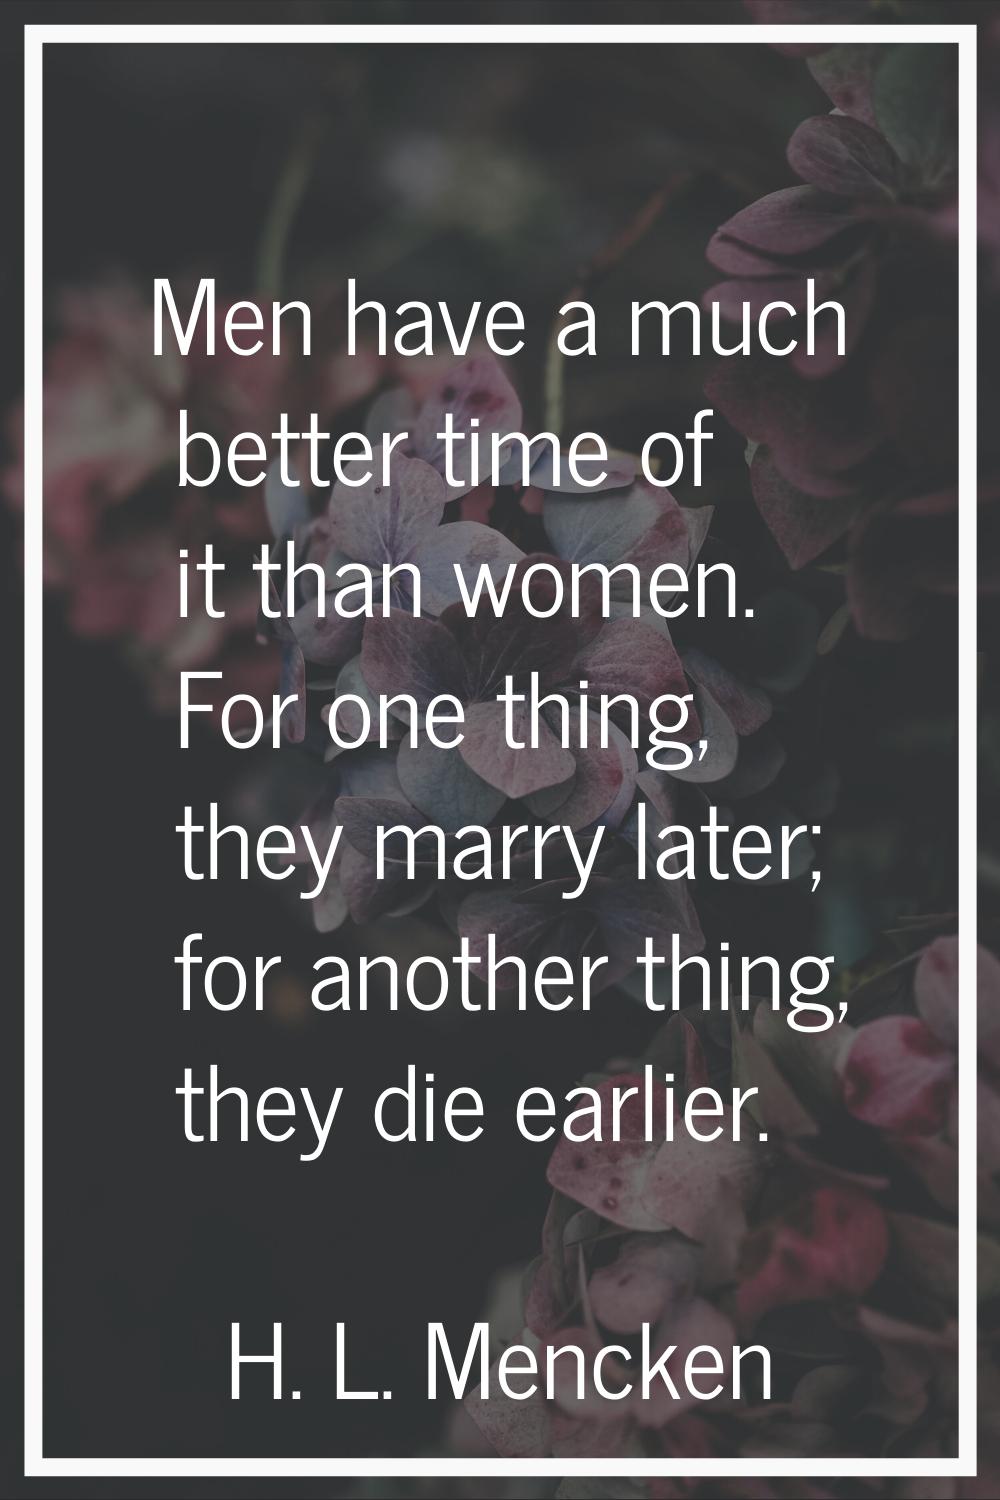 Men have a much better time of it than women. For one thing, they marry later; for another thing, t